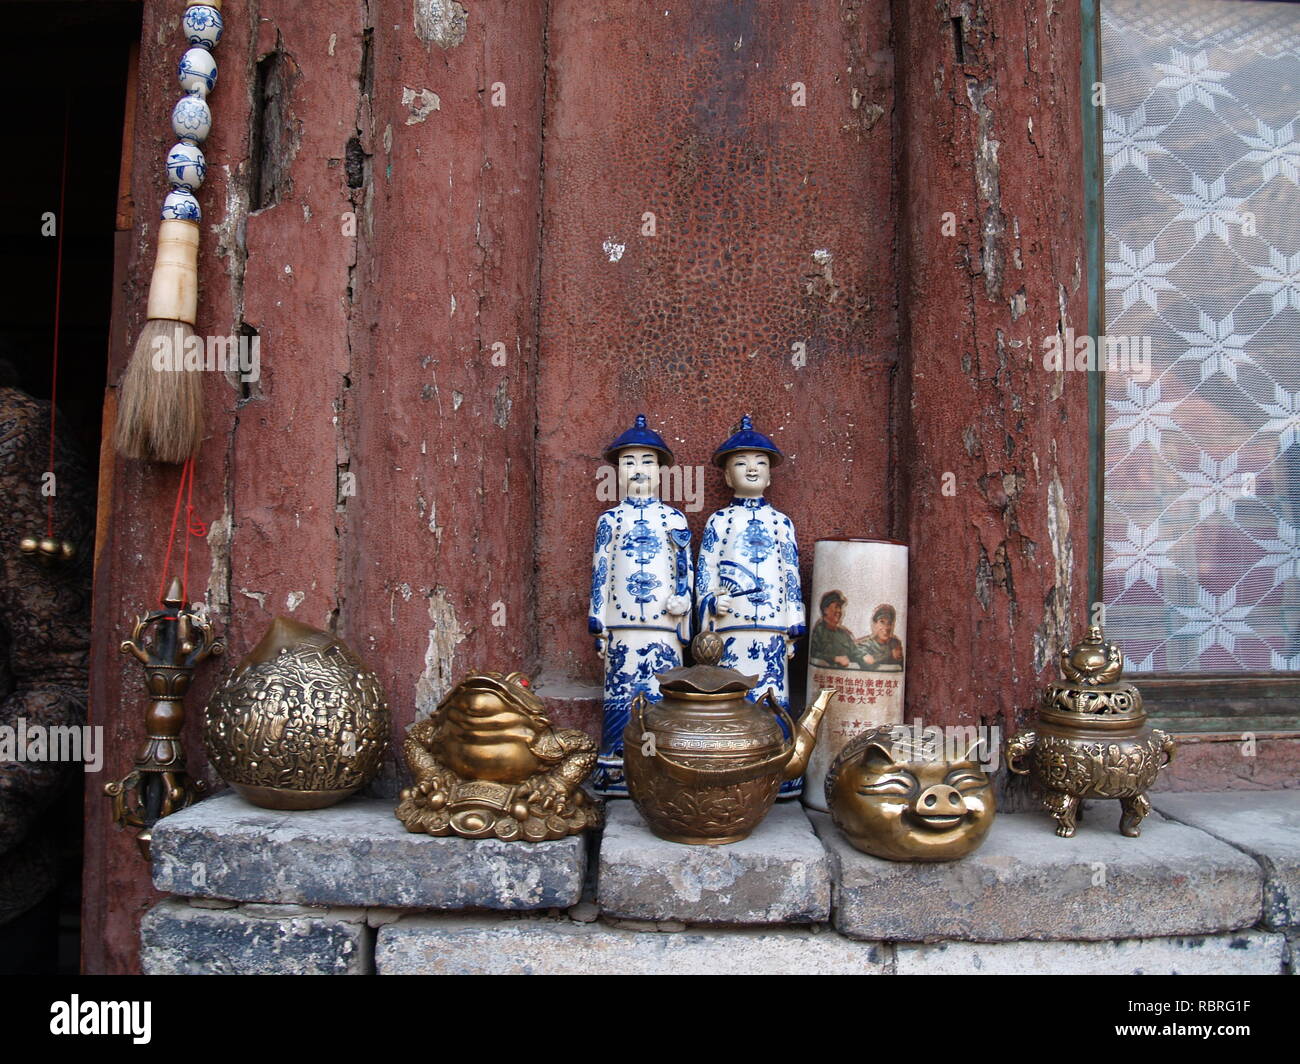 Chinese curios on sale at shop Stock Photo